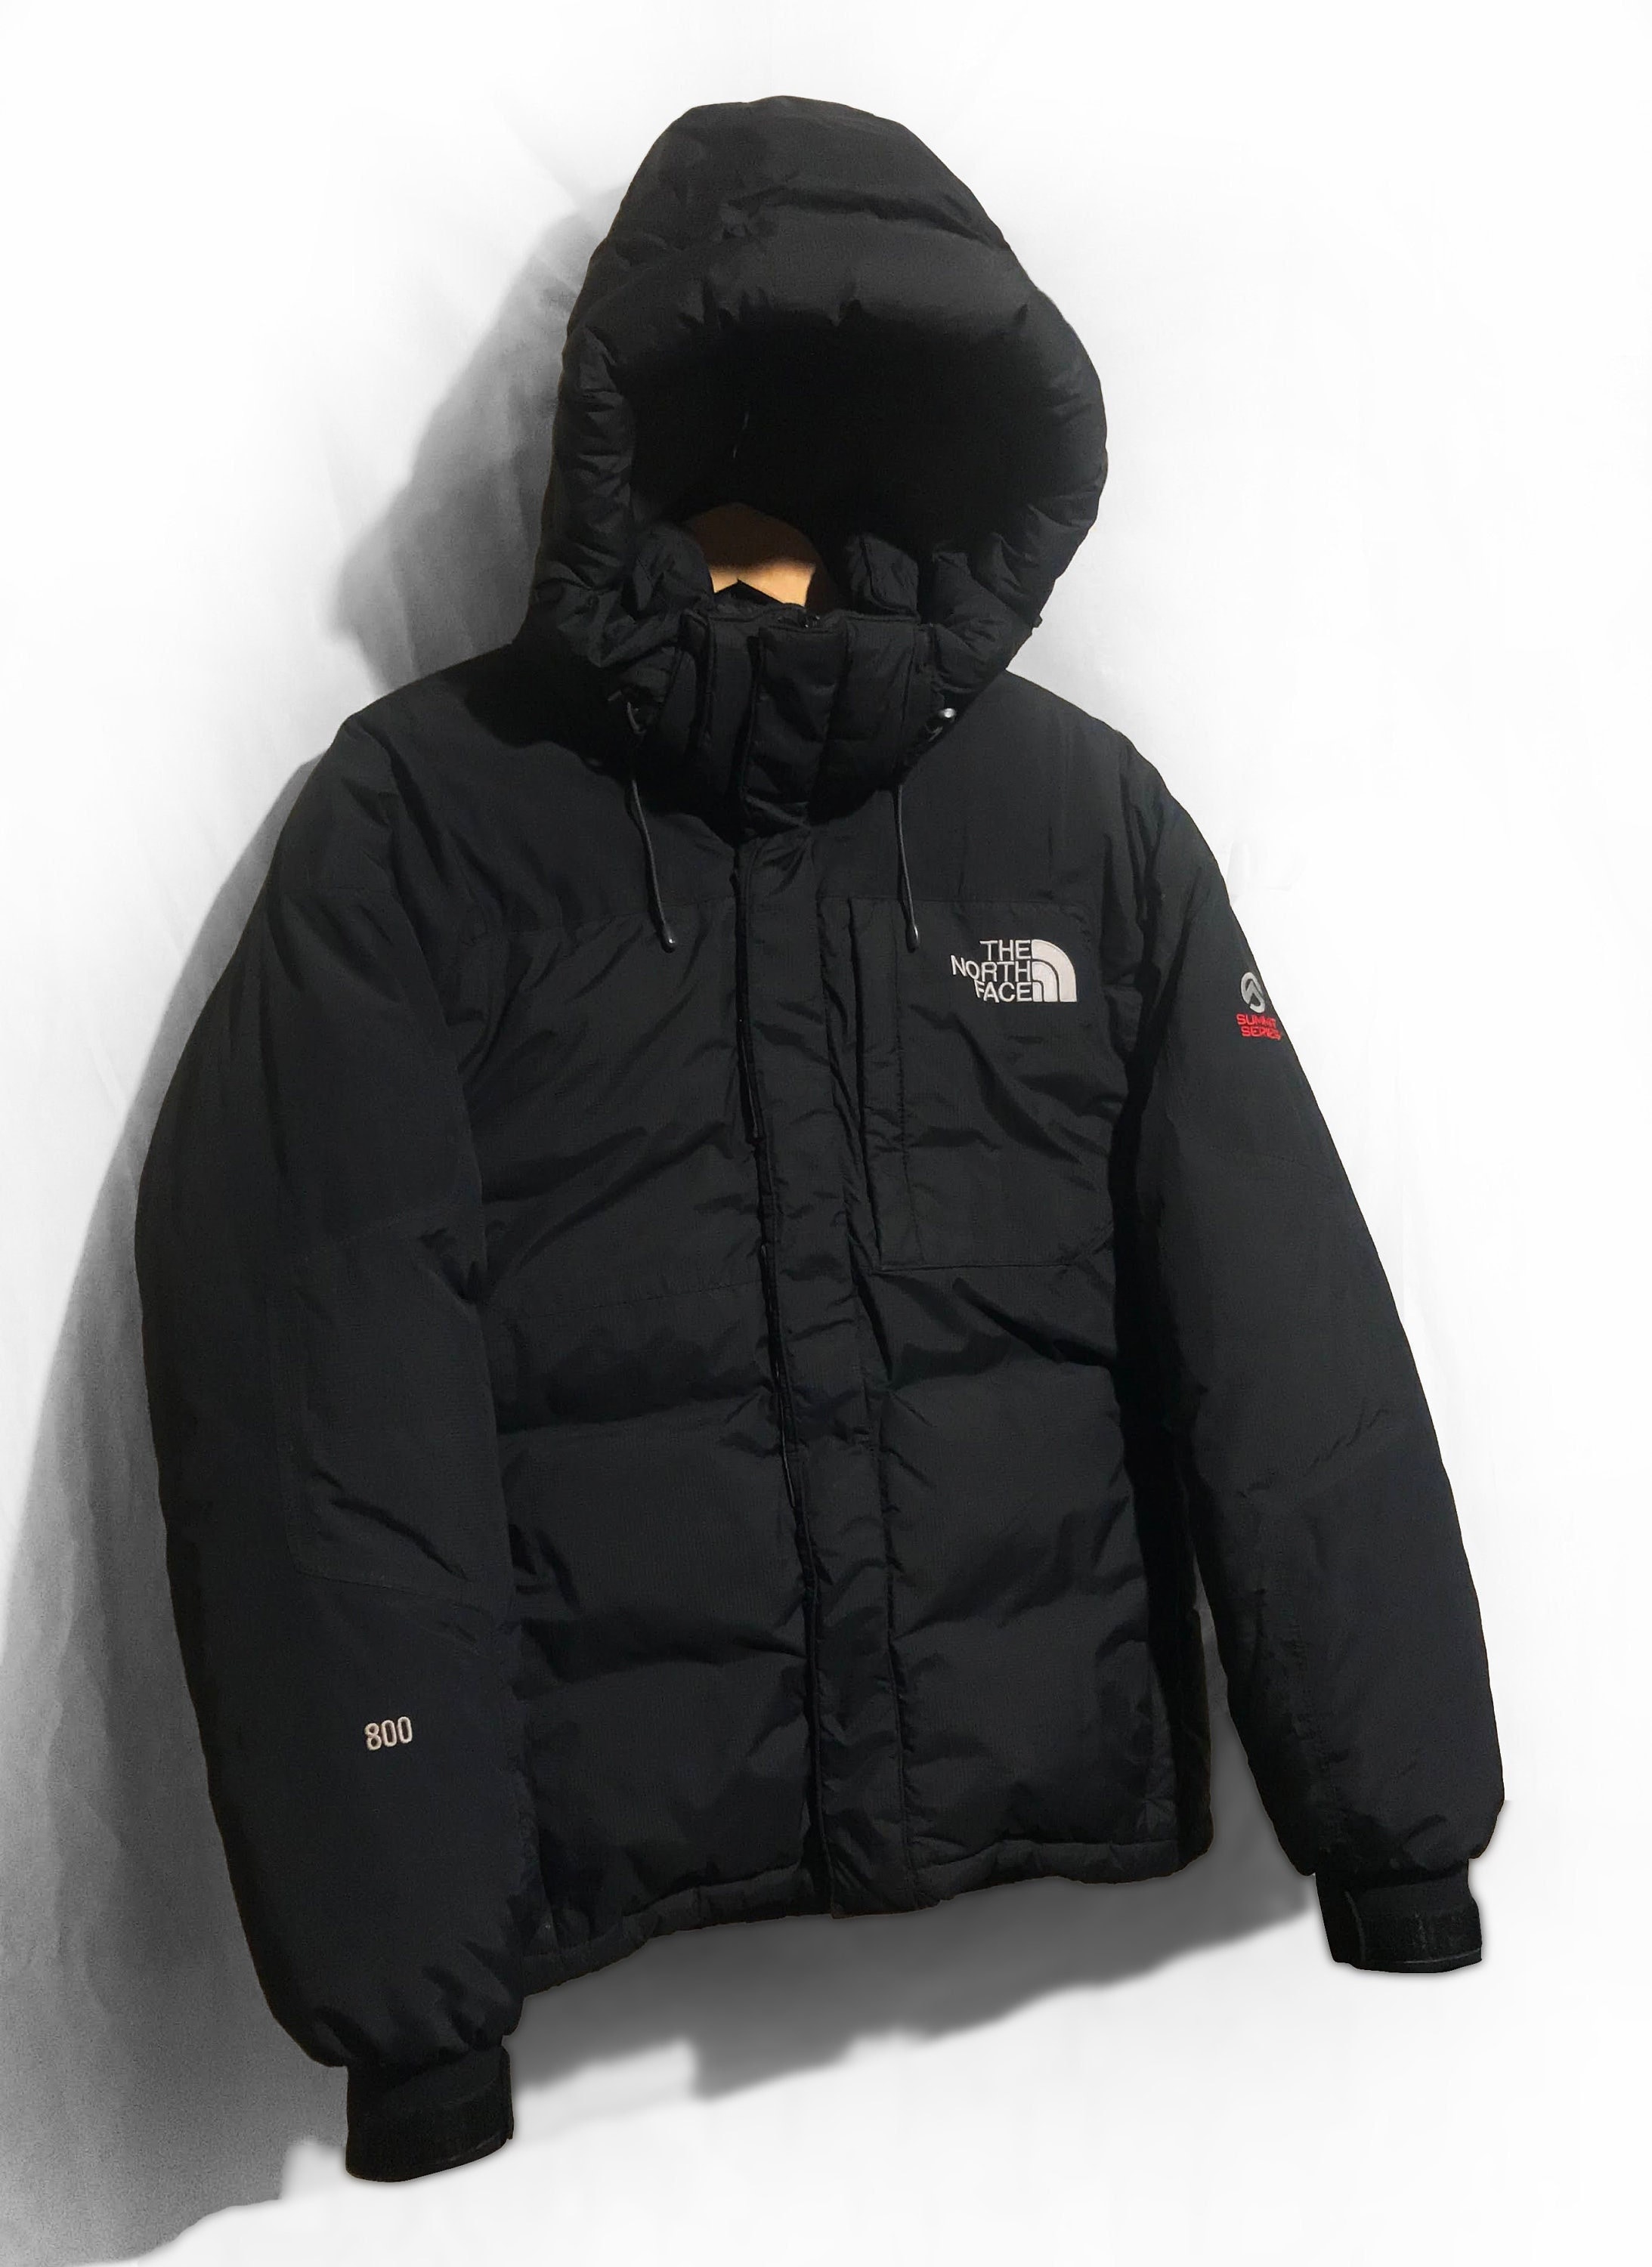 The North Face Himalayan Summit Series Jacket | sites.unimi.it